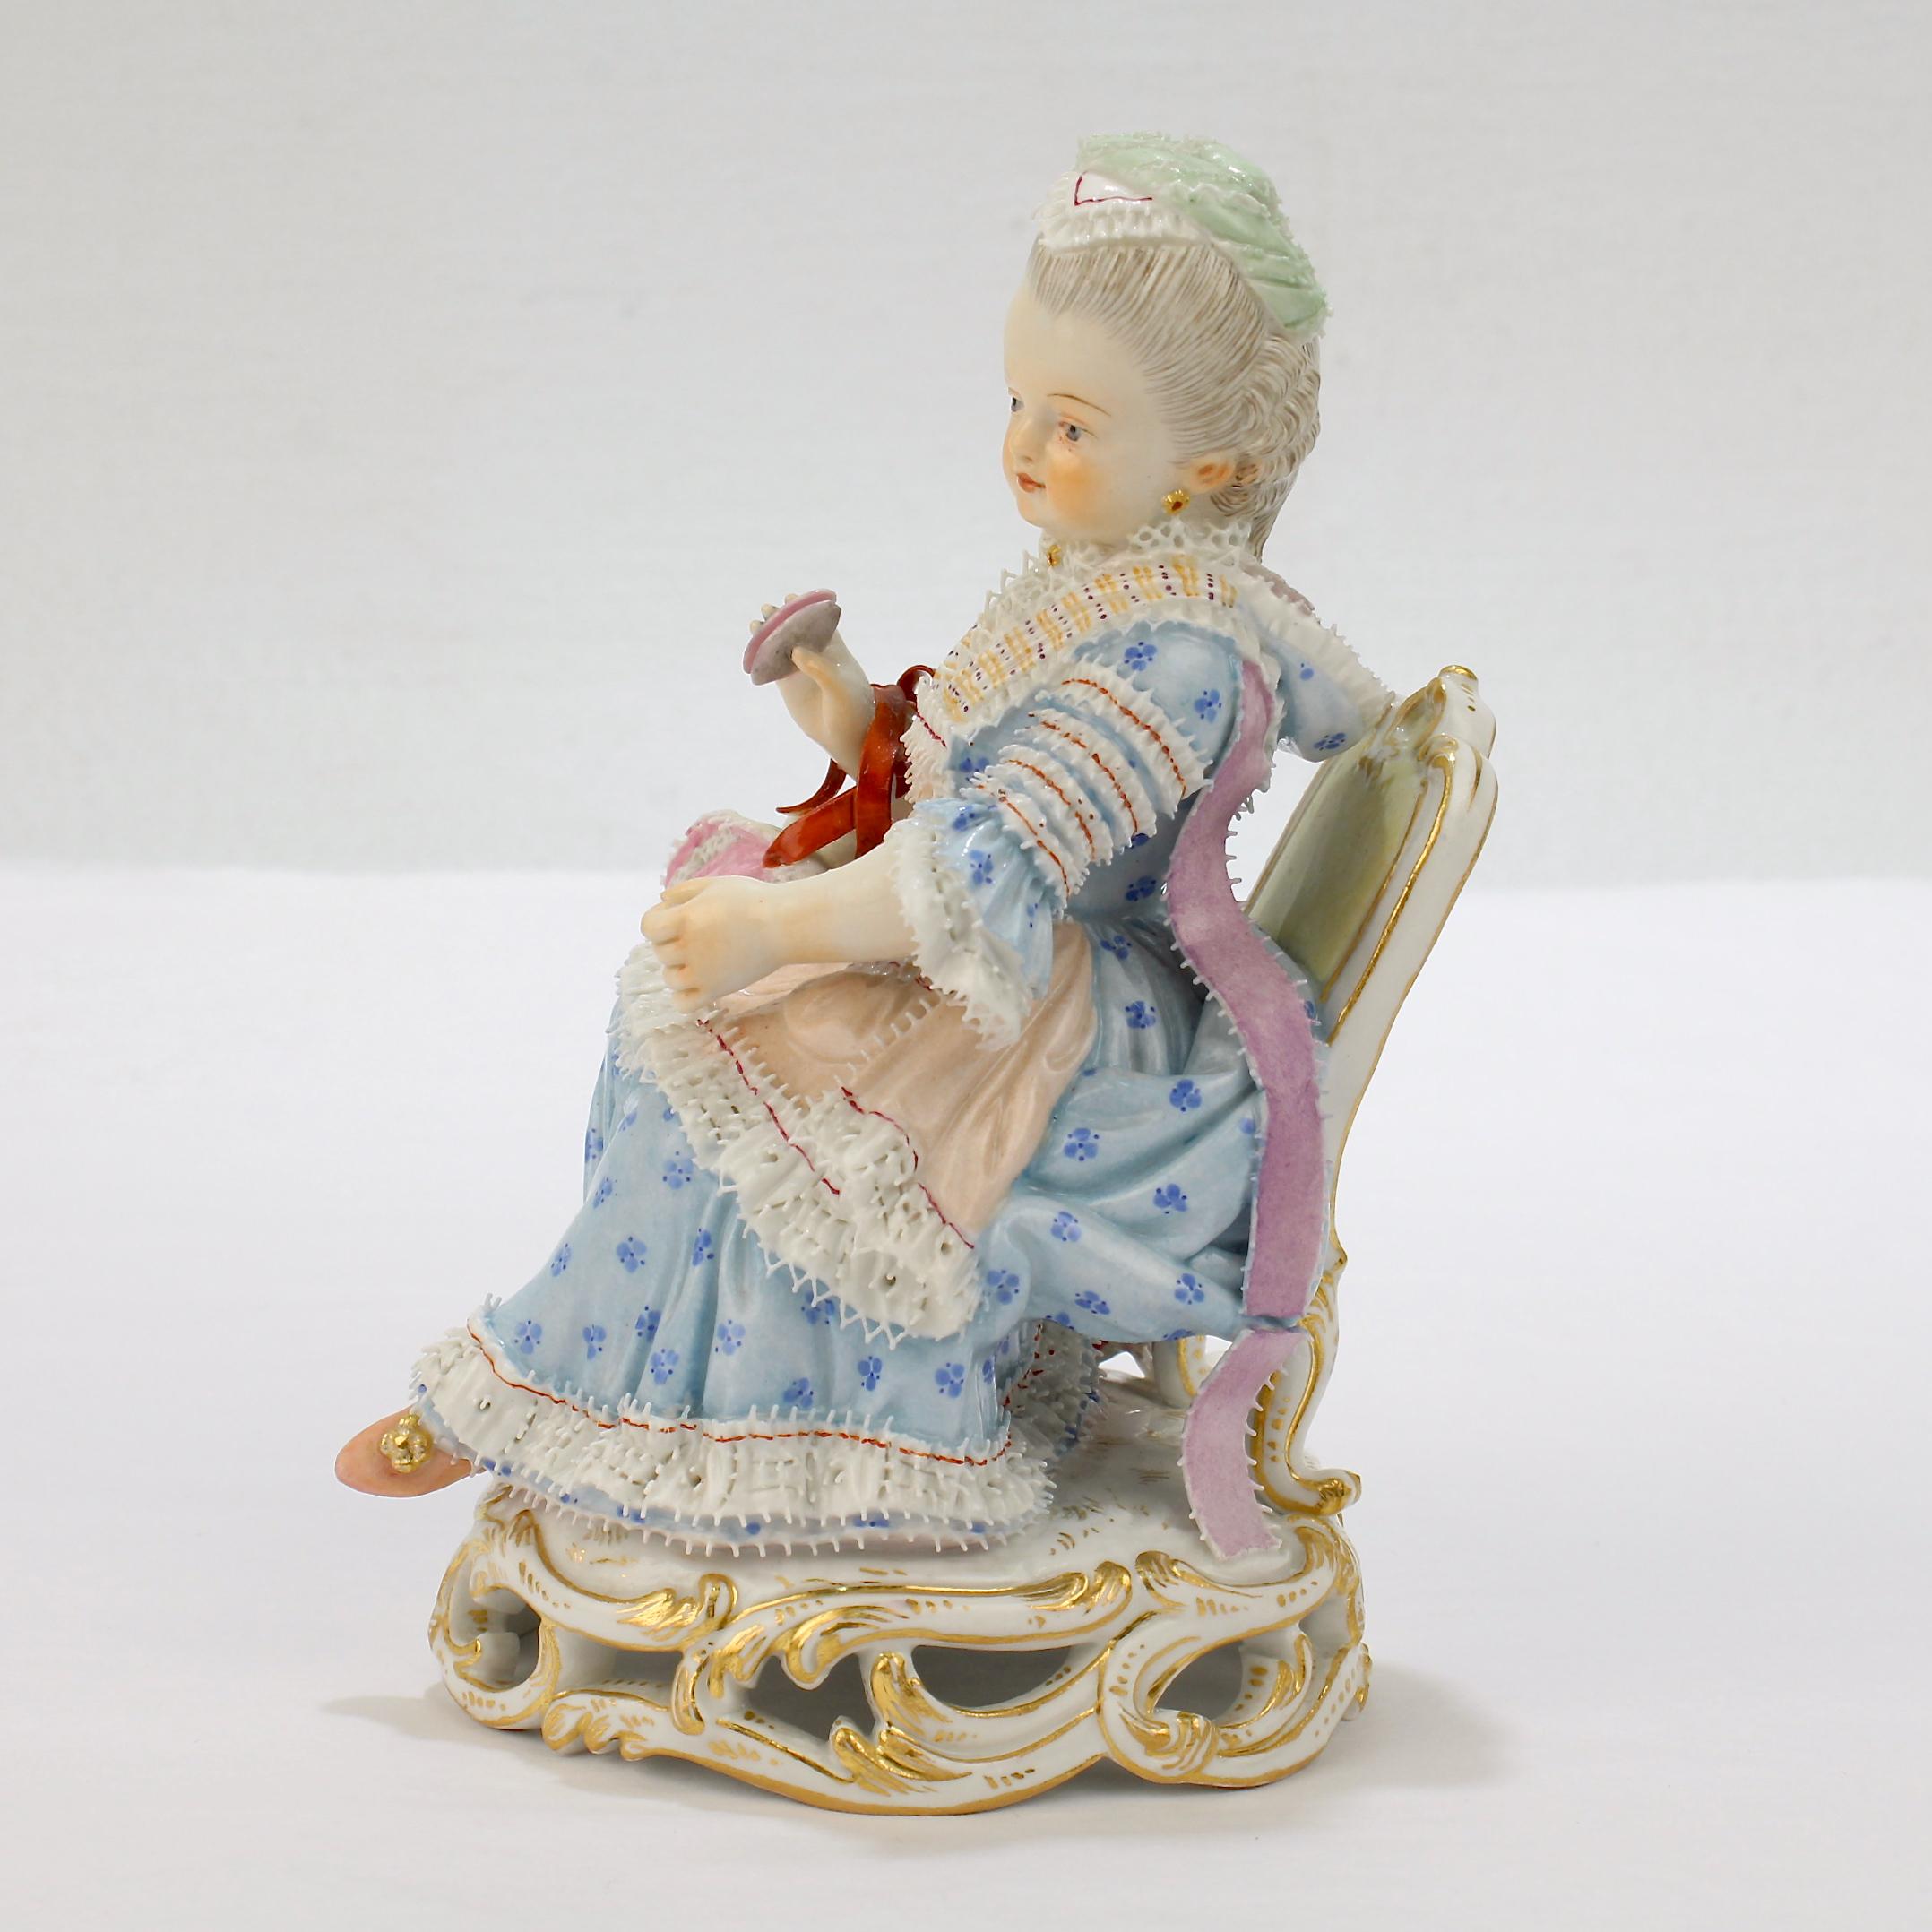 A fine antique Meissen porcelain figurine of a seated girl.

Depicting a young girl seated in a chair with a bonnet wrapped around one arm and holding a thread winder in the same hand. Her dress and headdress are both finished with lace.

Model